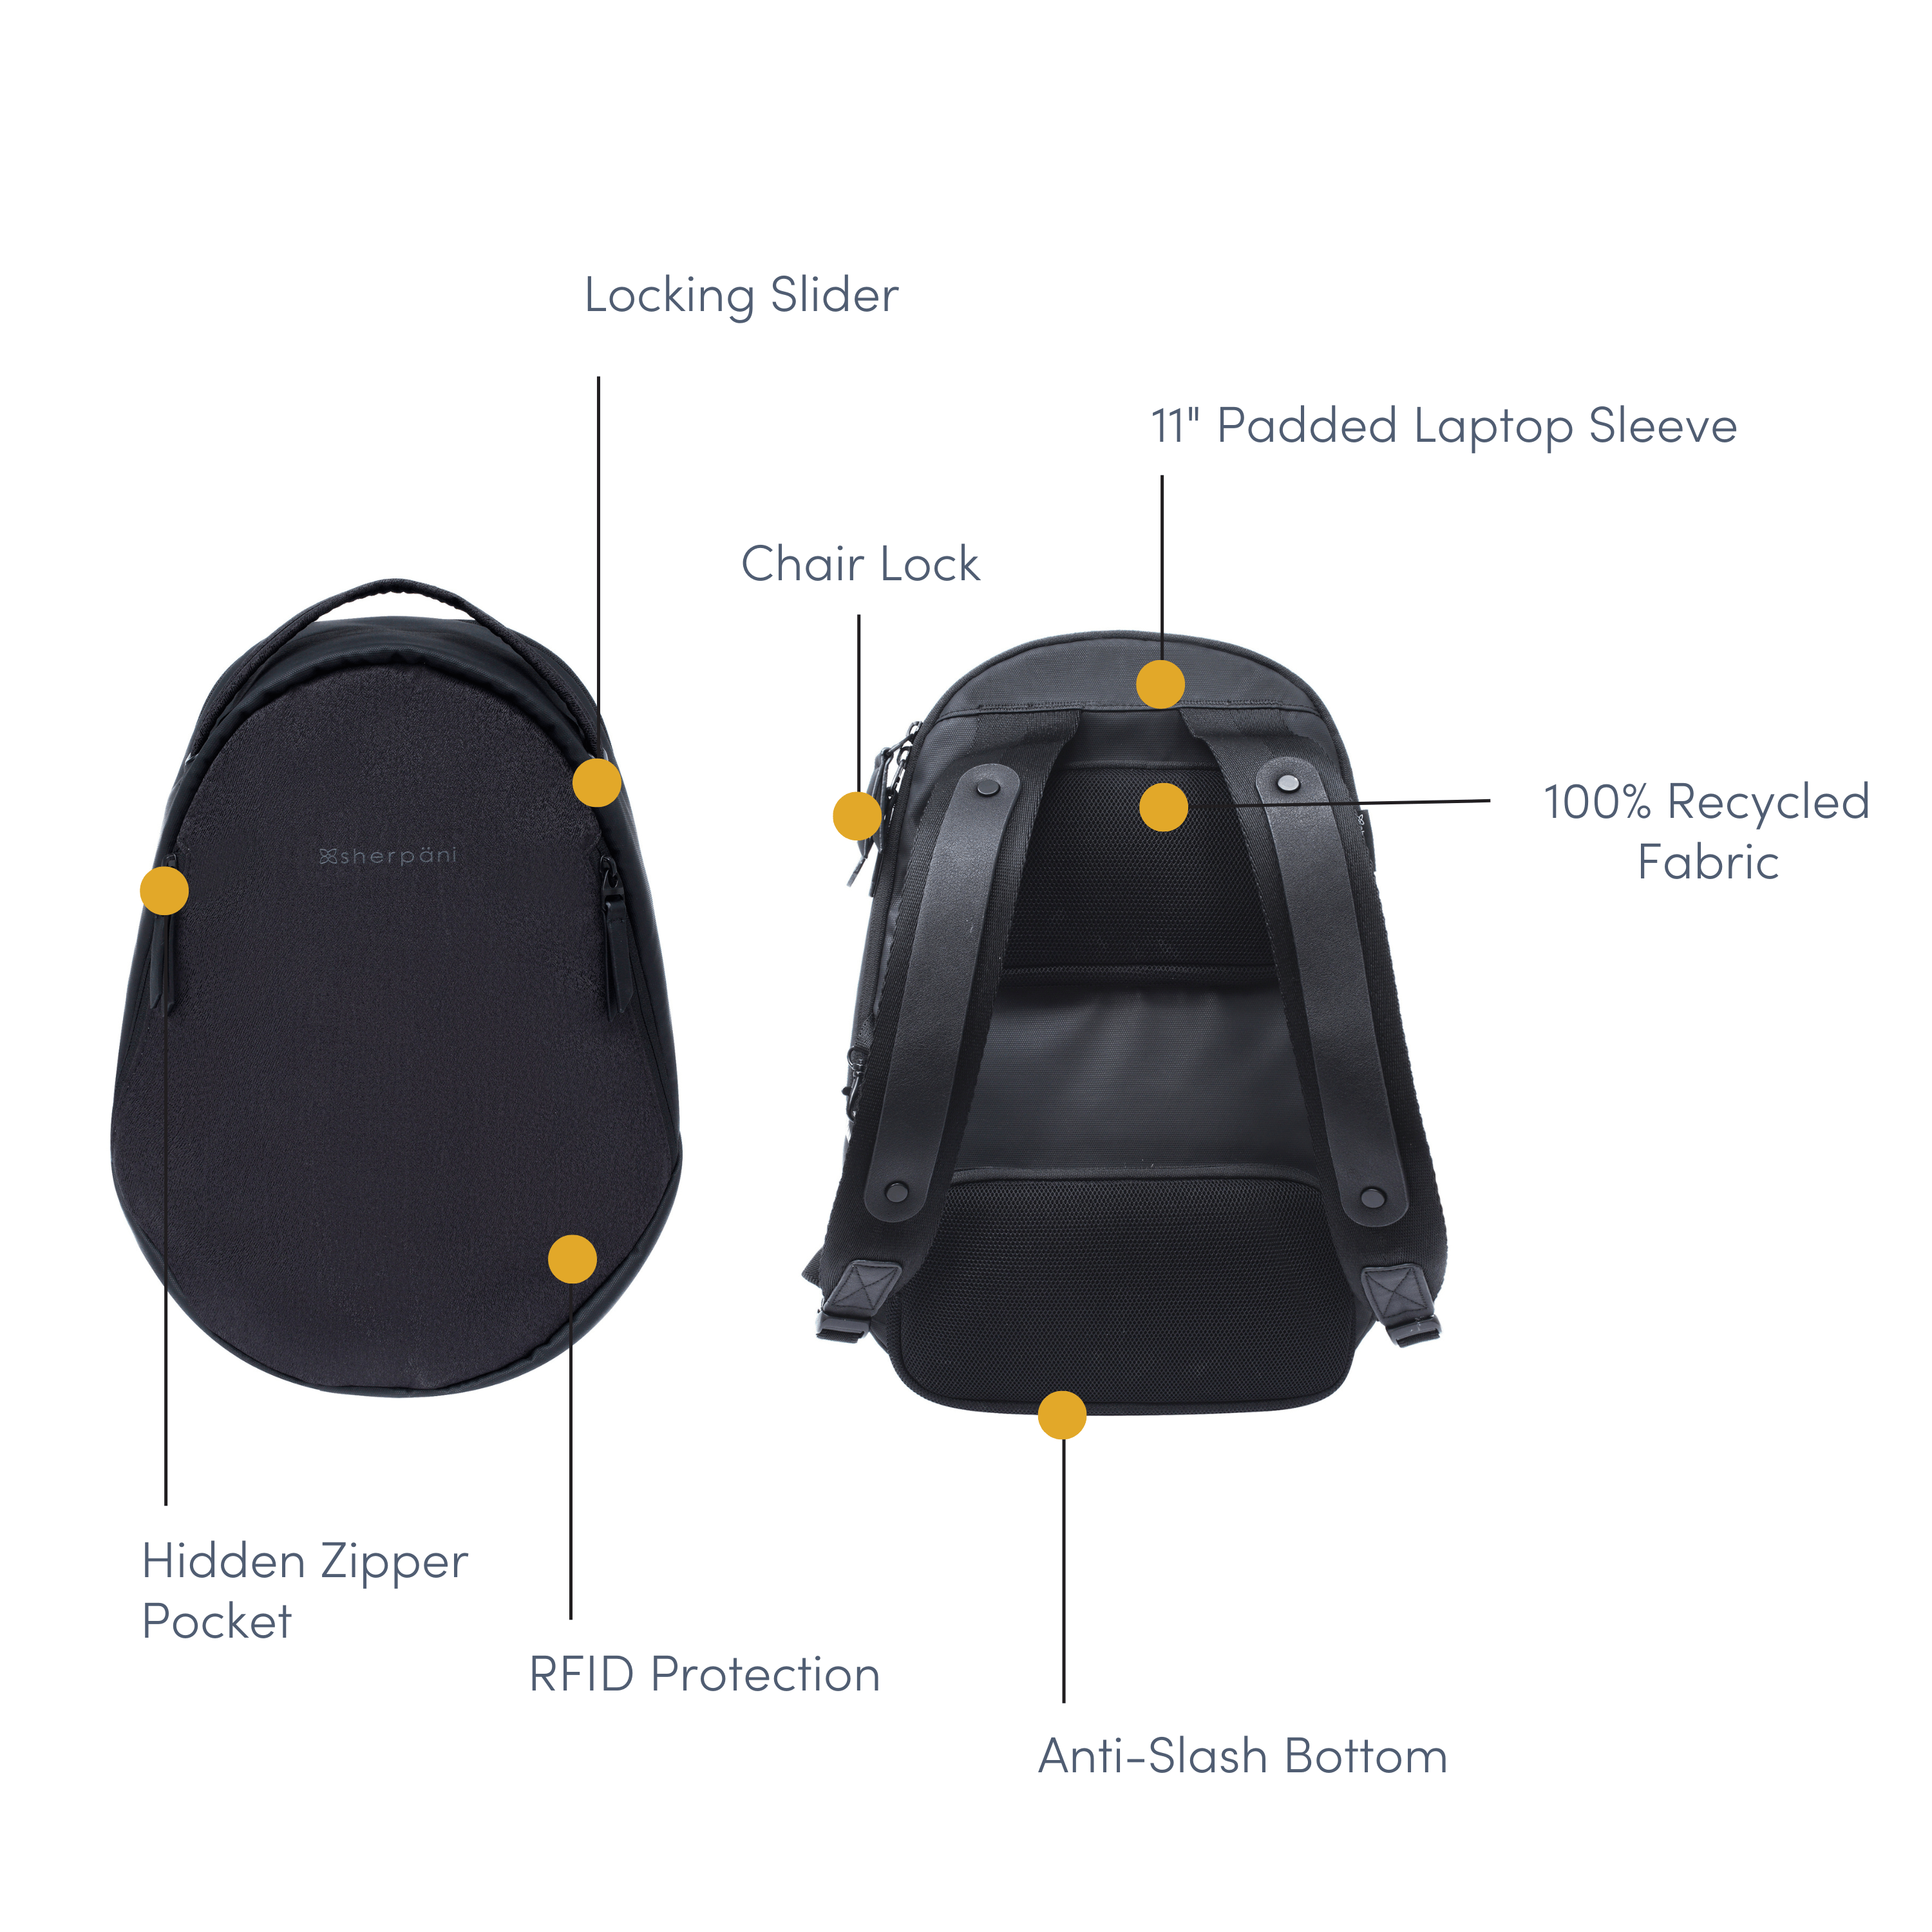 Graphic showcasing the features of Sherpani’s Anti Theft backpack, the Presta in Black. There is a front and a back view of the bag; yellow circles highlight the following features: Locking Slider, Chair Lock, 11” Padded Laptop Sleeve, 100% Recycled Fabric, Anti-Slash Bottom, RFID Protection and Hidden Zipper Pocket.